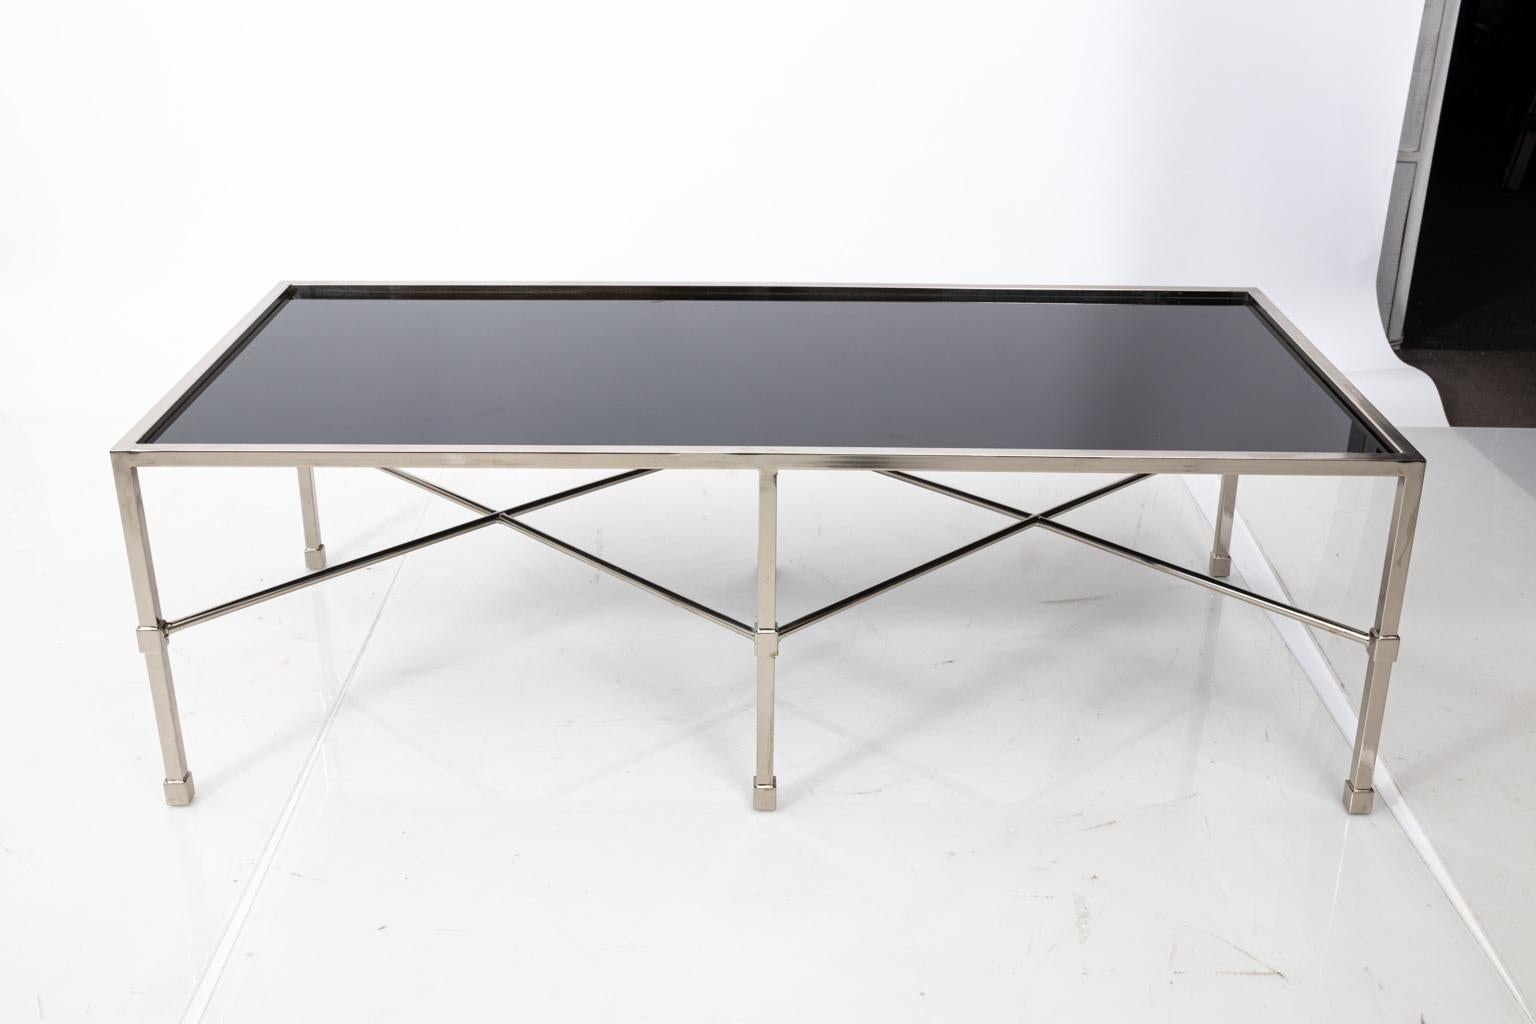 Chrome and black glass coffee table with double X-frame base in a polished finish, circa 1990s. Please note of wear consistent with age including minor pitting to the Chrome. Made in the United States.